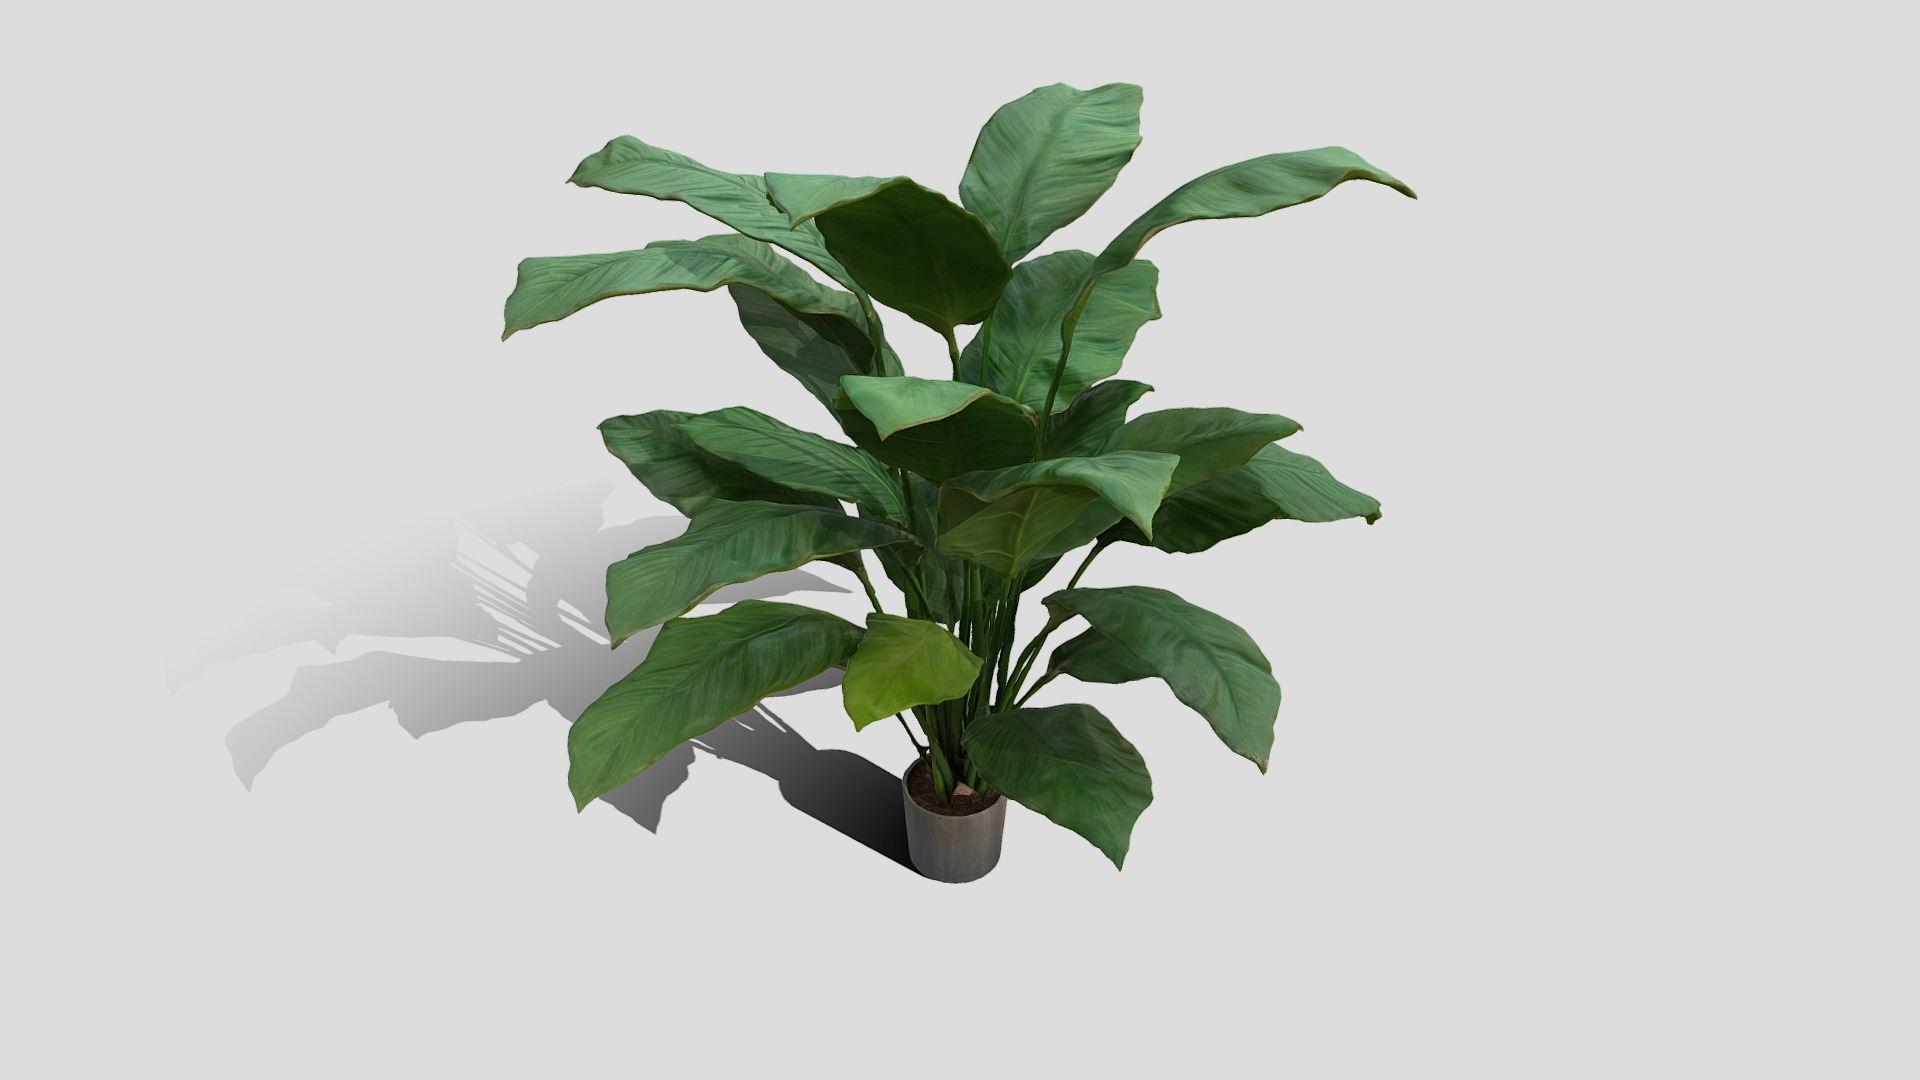 3D model 000123_192711 - This is a 3D model of the 000123_192711. The 3D model is about a potted plant with green leaves.